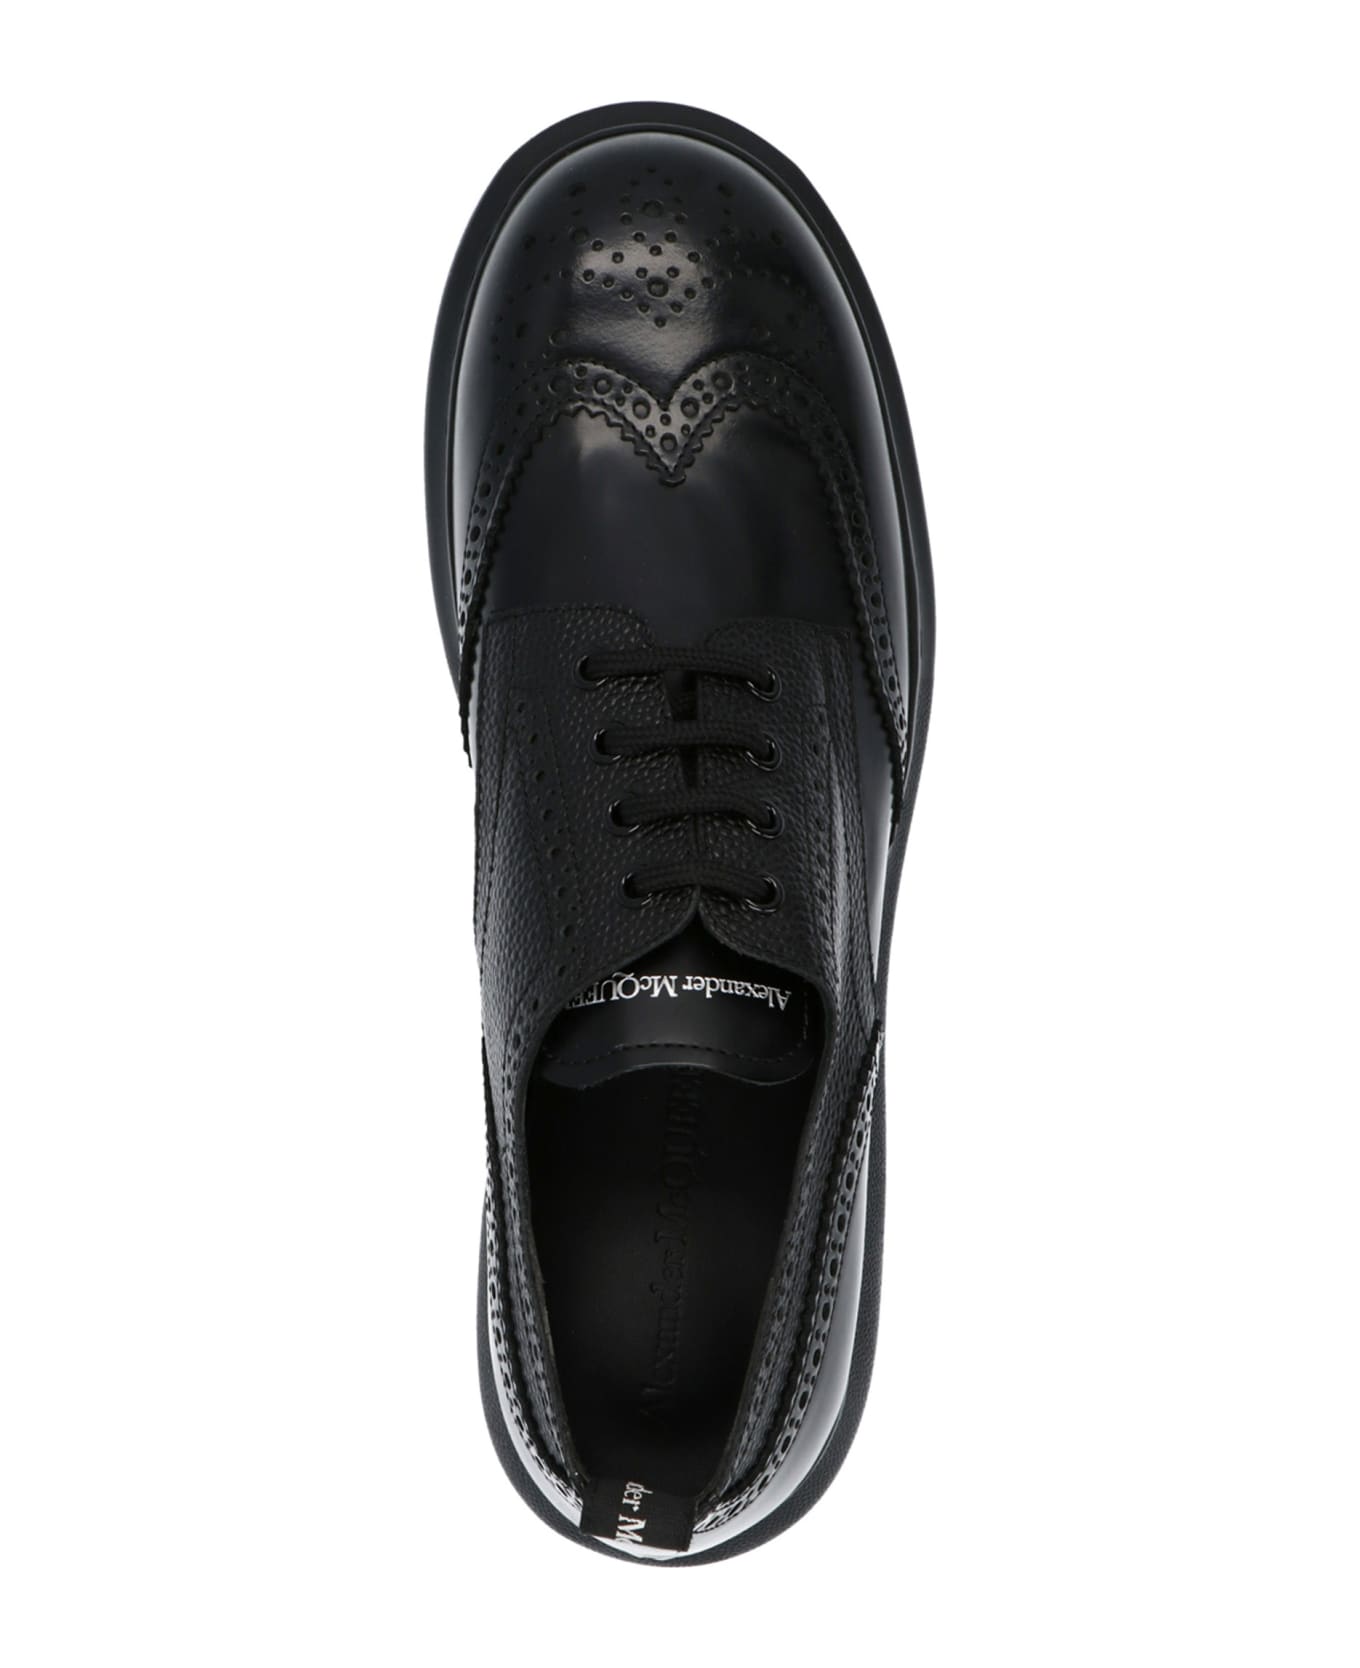 Alexander McQueen Hybrid Lace Up Shoes - Black